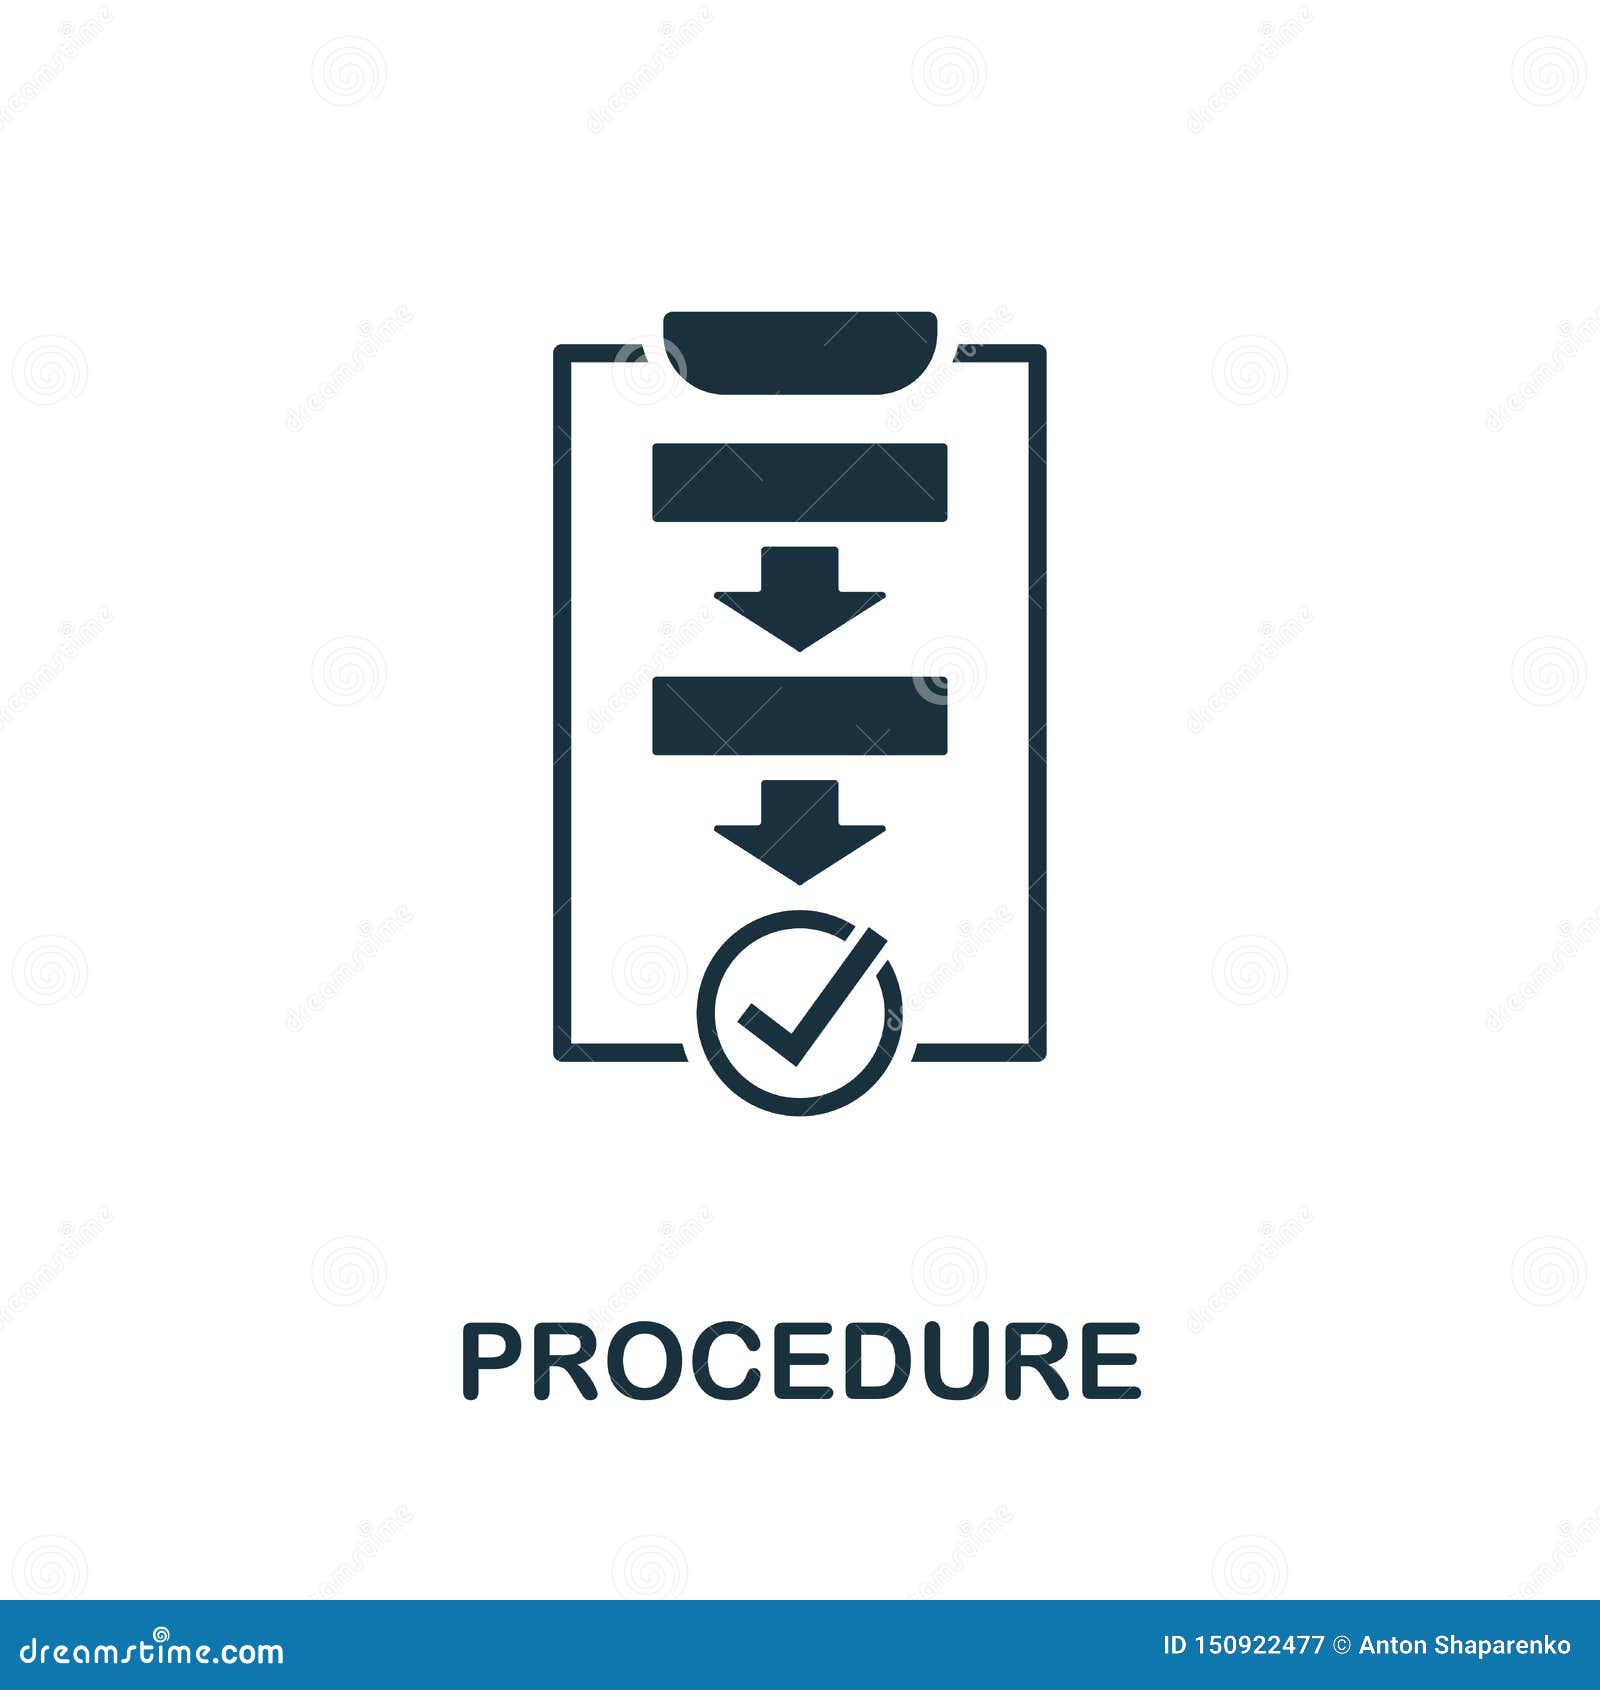 procedure  icon . creative sign from quality control icons collection. filled flat procedure icon for computer and